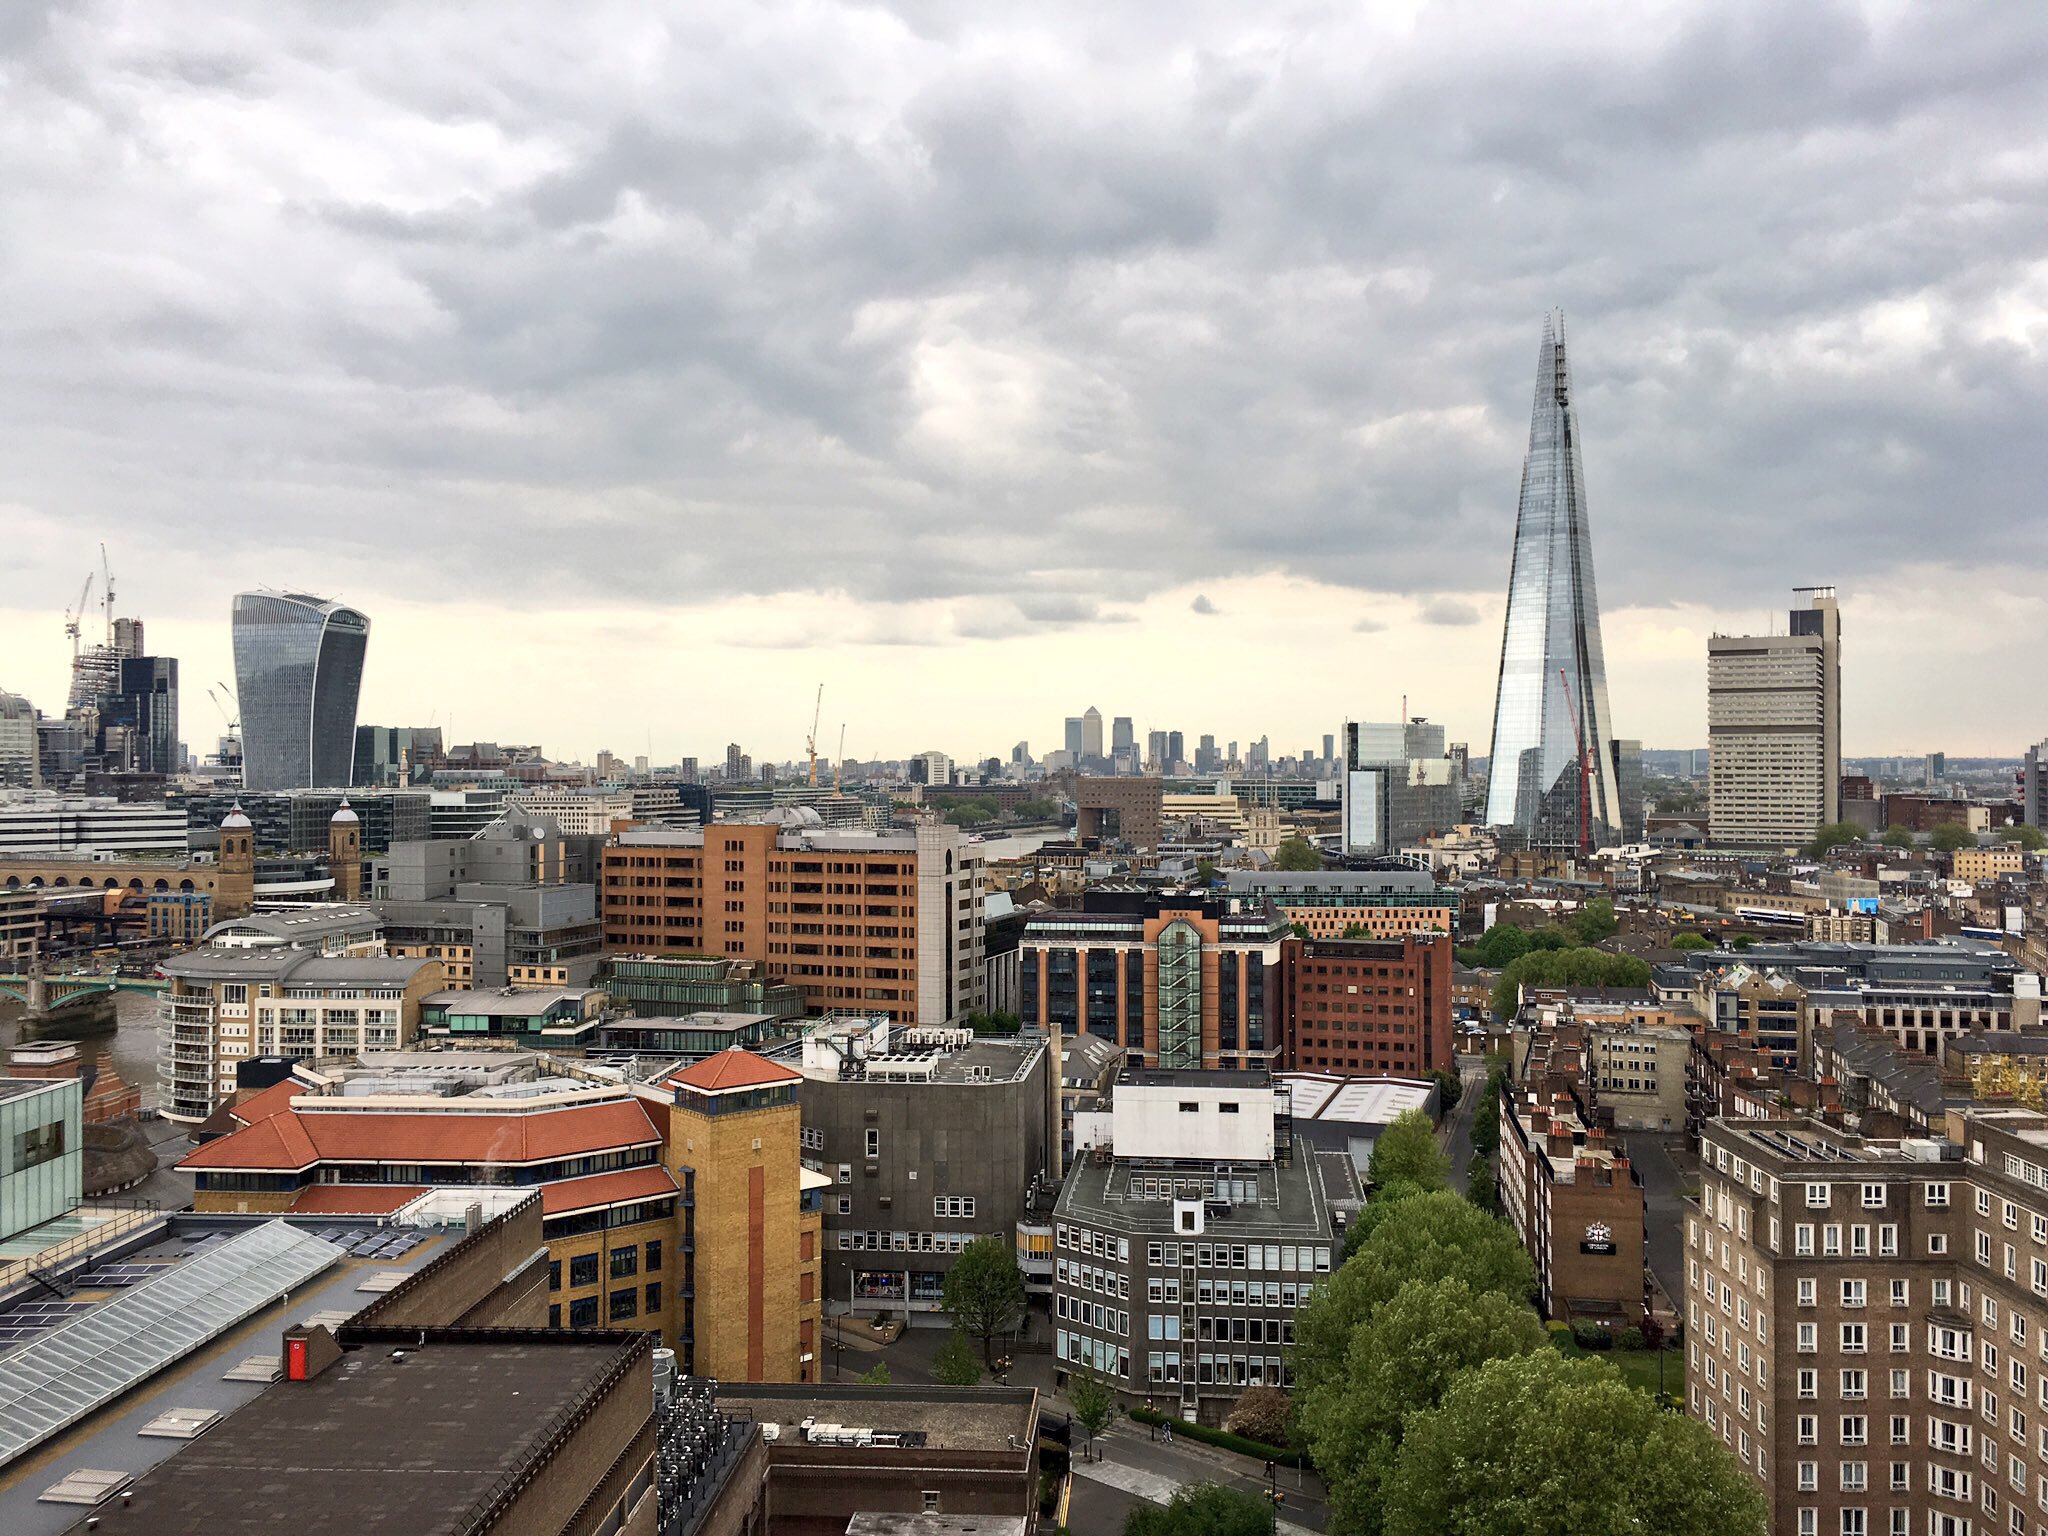 Looking out from the reclaimed industrial Tate Modern to The Shard, I feel like I understand JG Ballard better. https://t.co/3Wvsy4Need